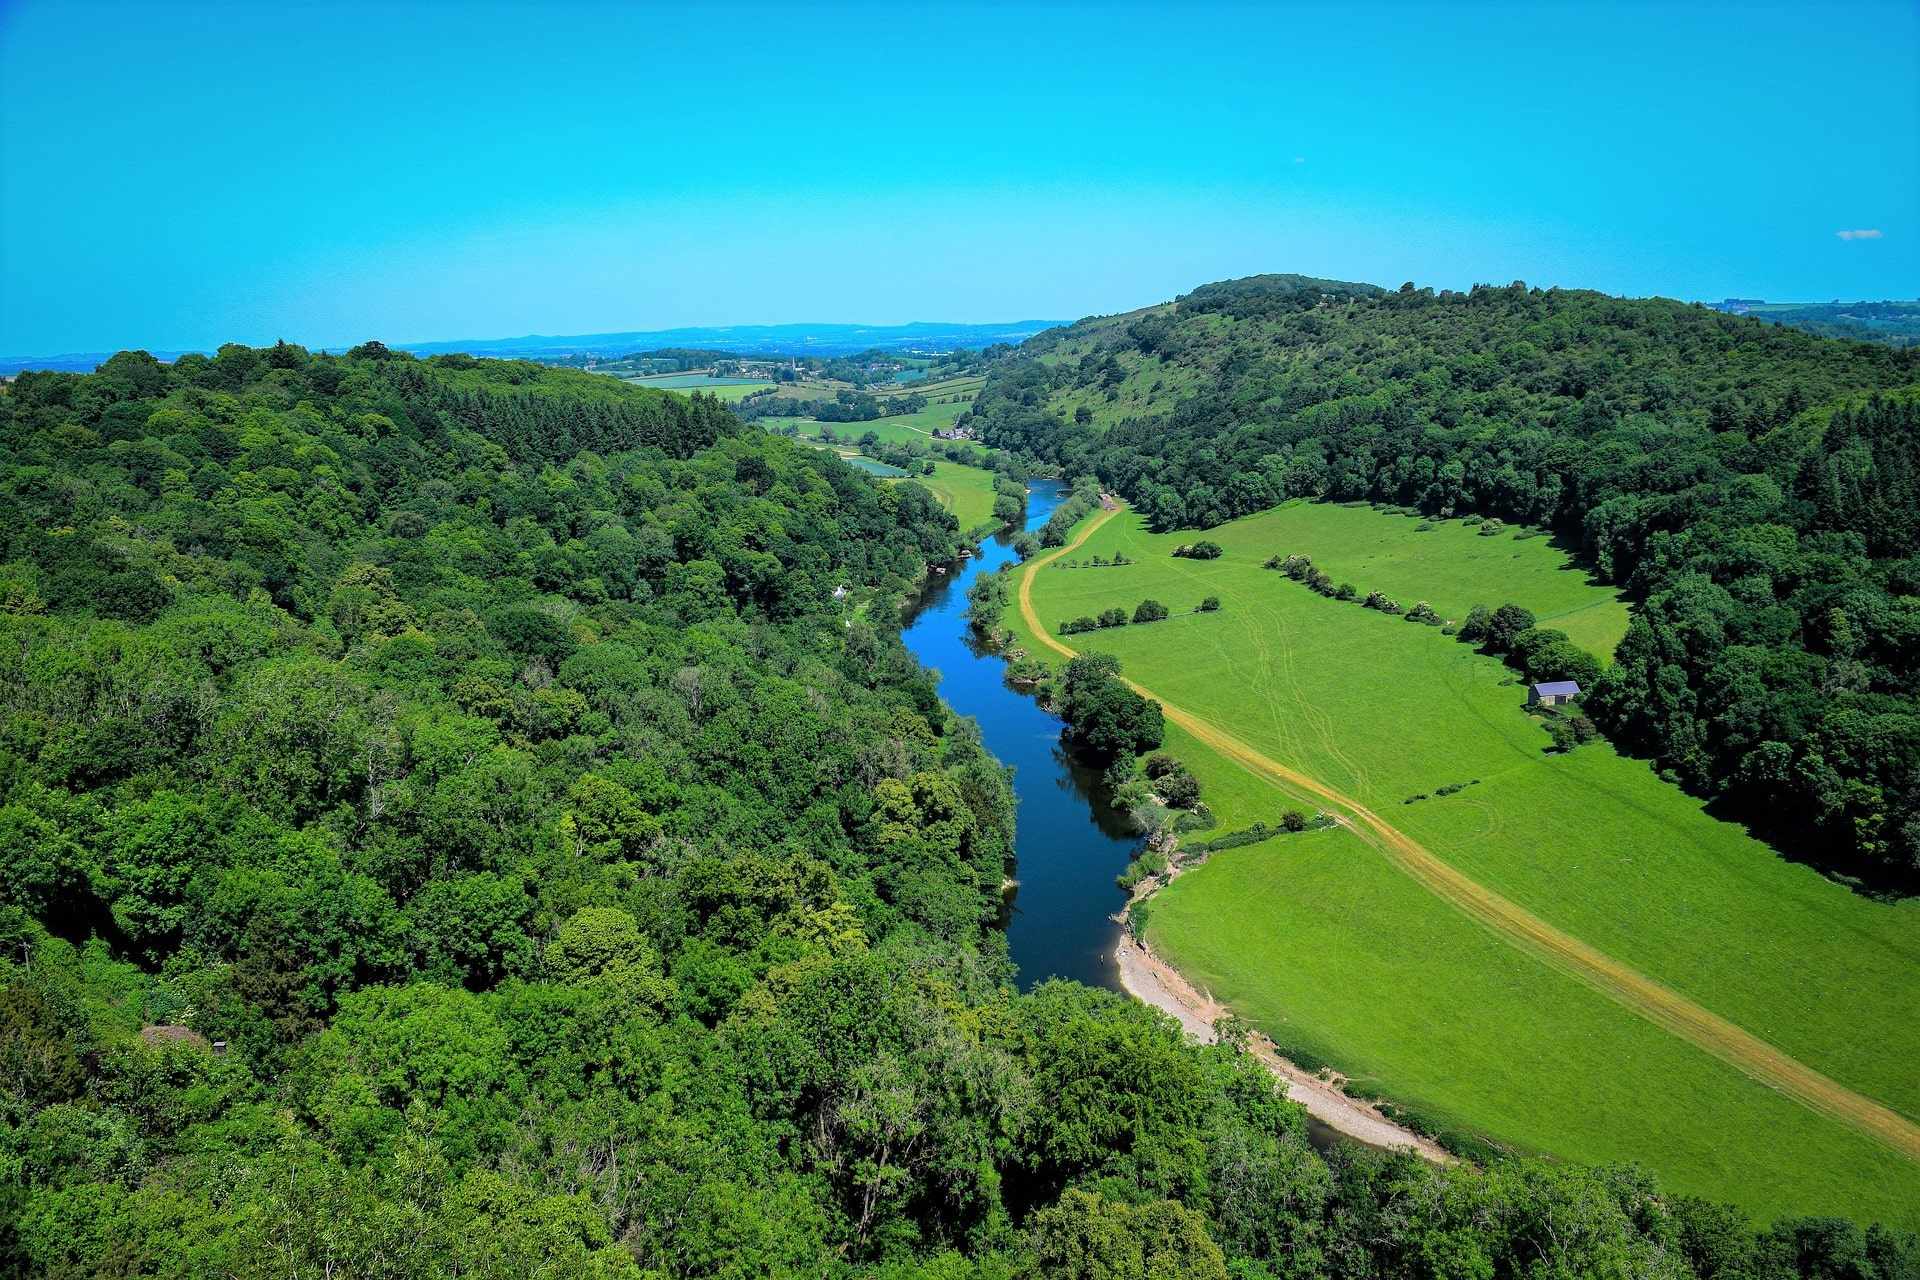 view-from-symonds-yat-rock-of-river-wye-running-through-countryside-things-to-do-in-the-forest-of-dean